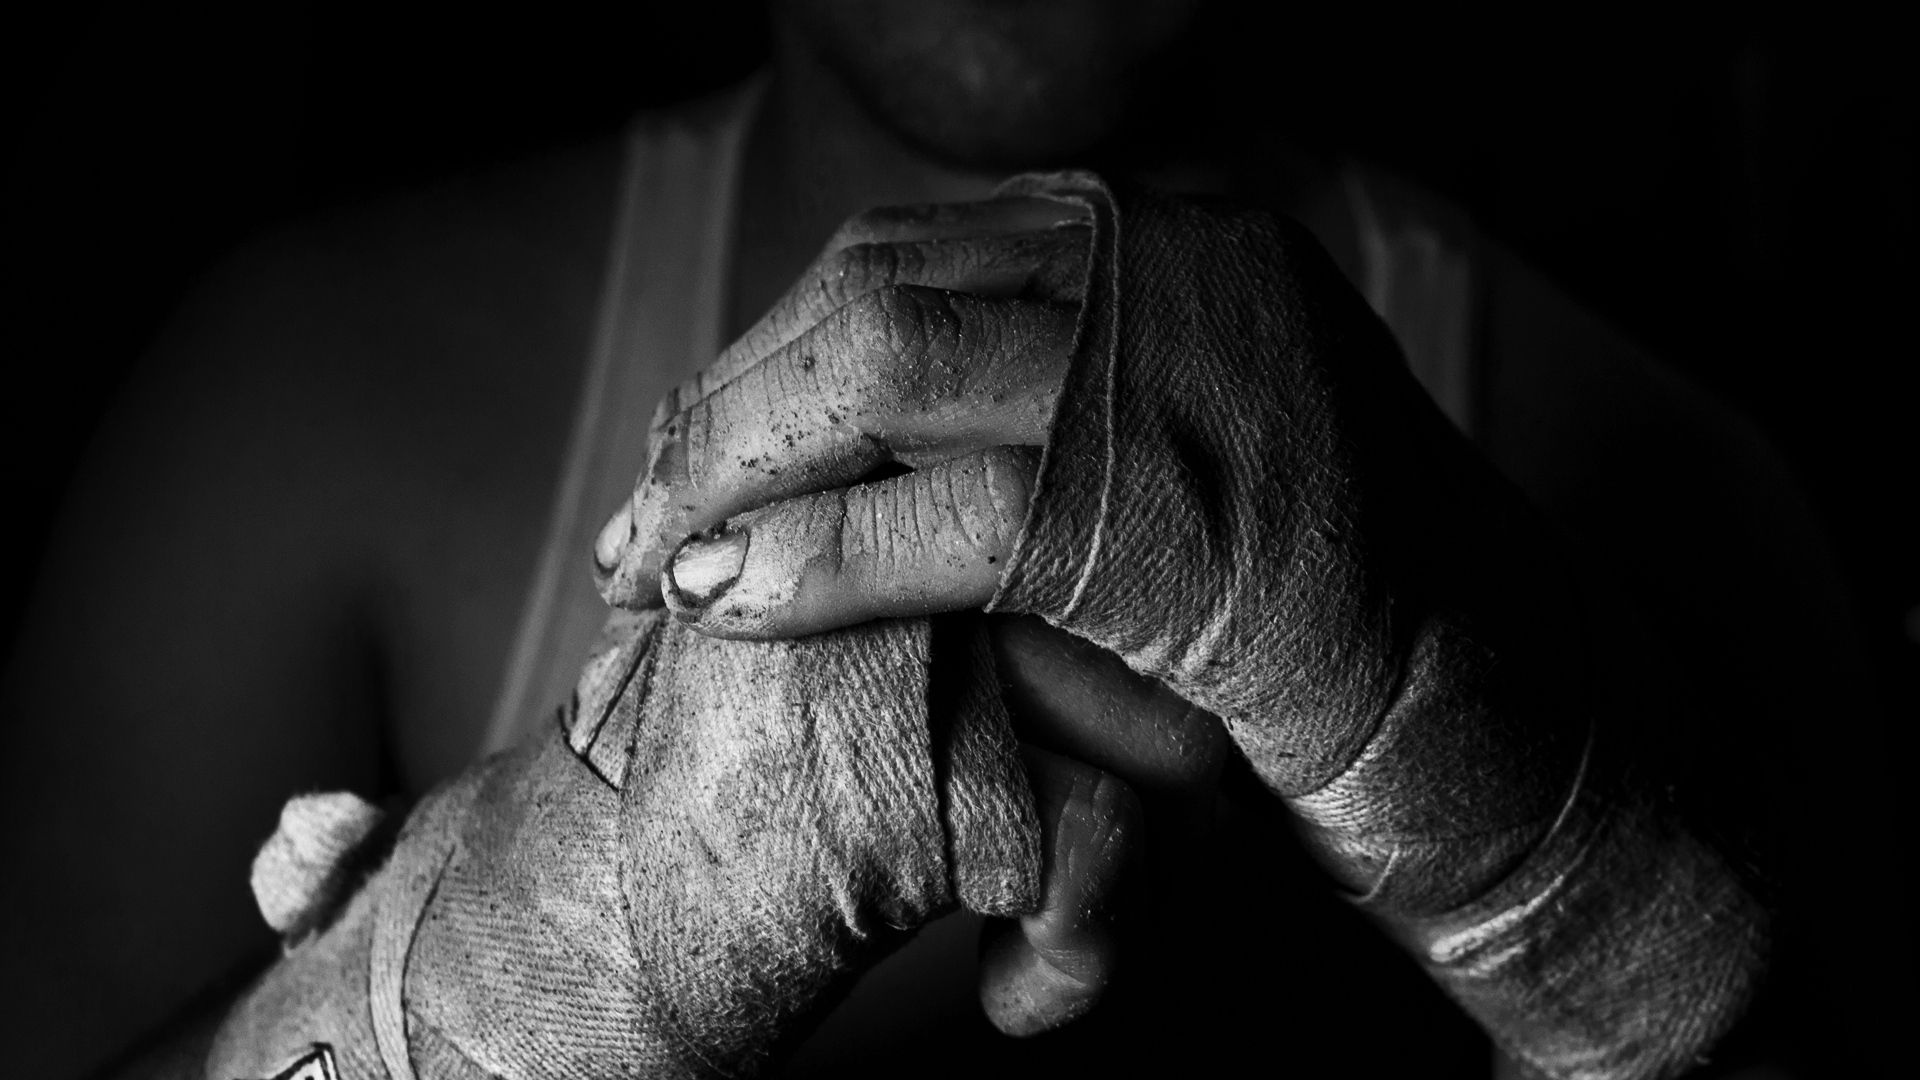 sports, chb, hands, bw, fighter, bandages